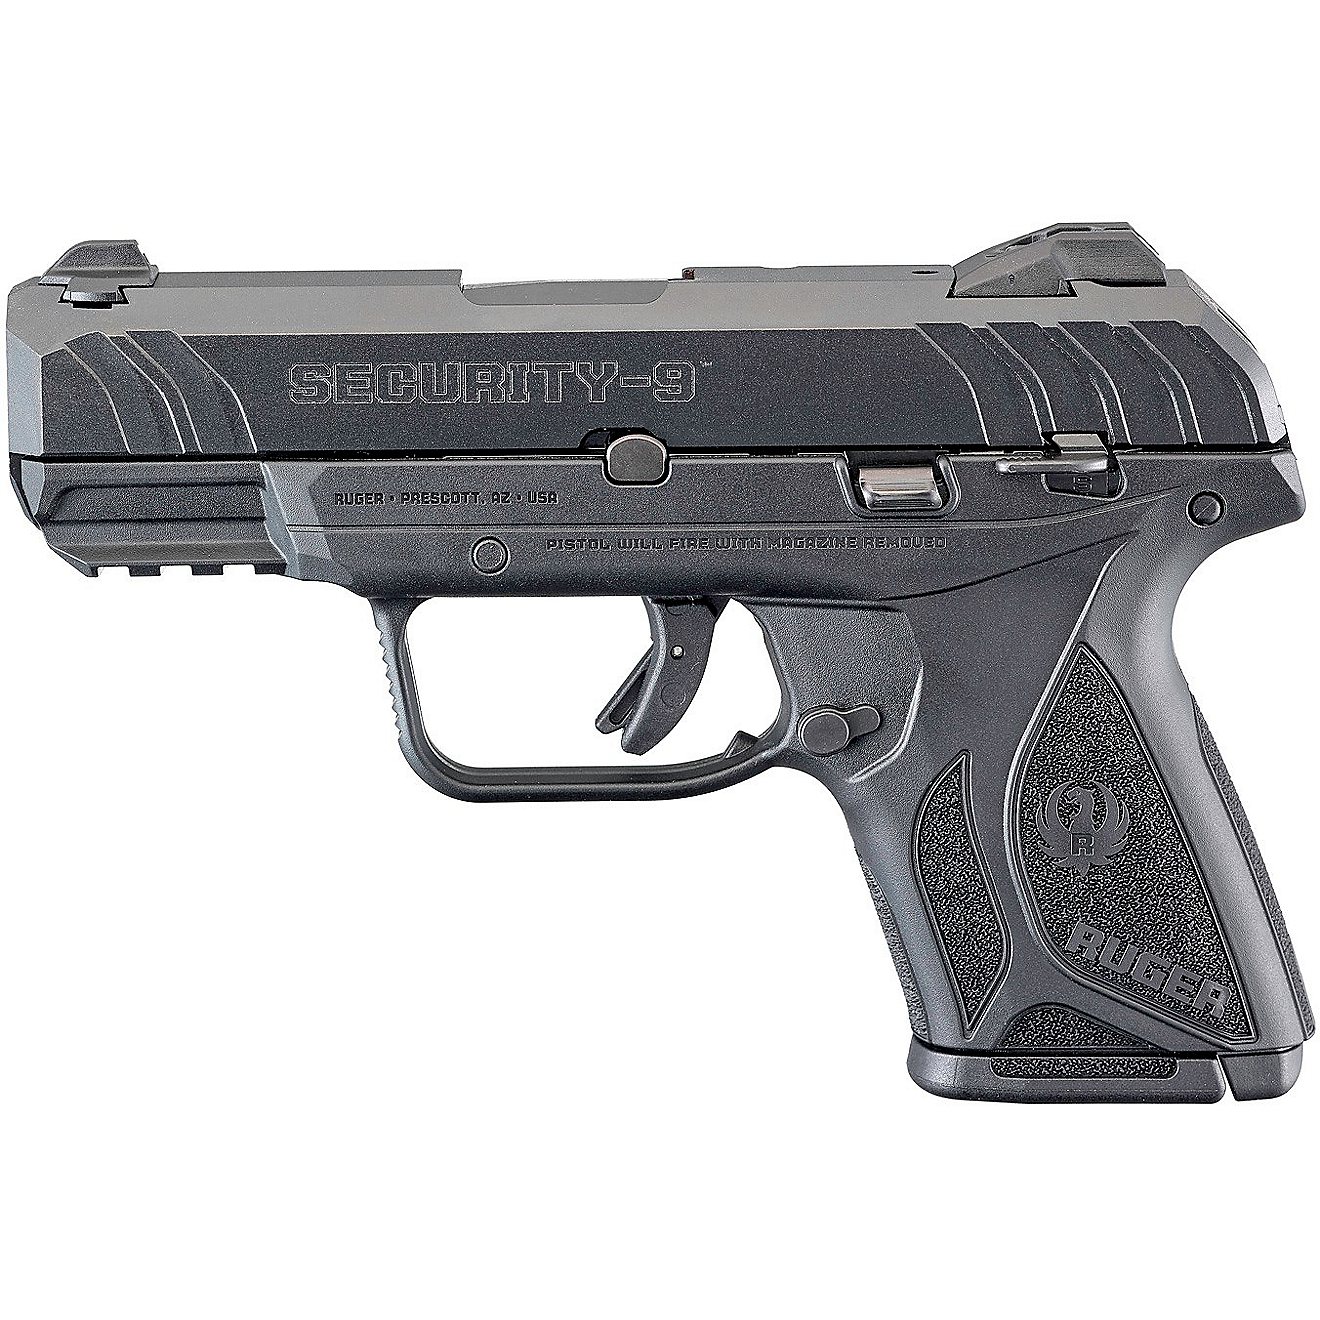 Ruger Security-9 Compact 9mm Pistol                                                                                              - view number 6